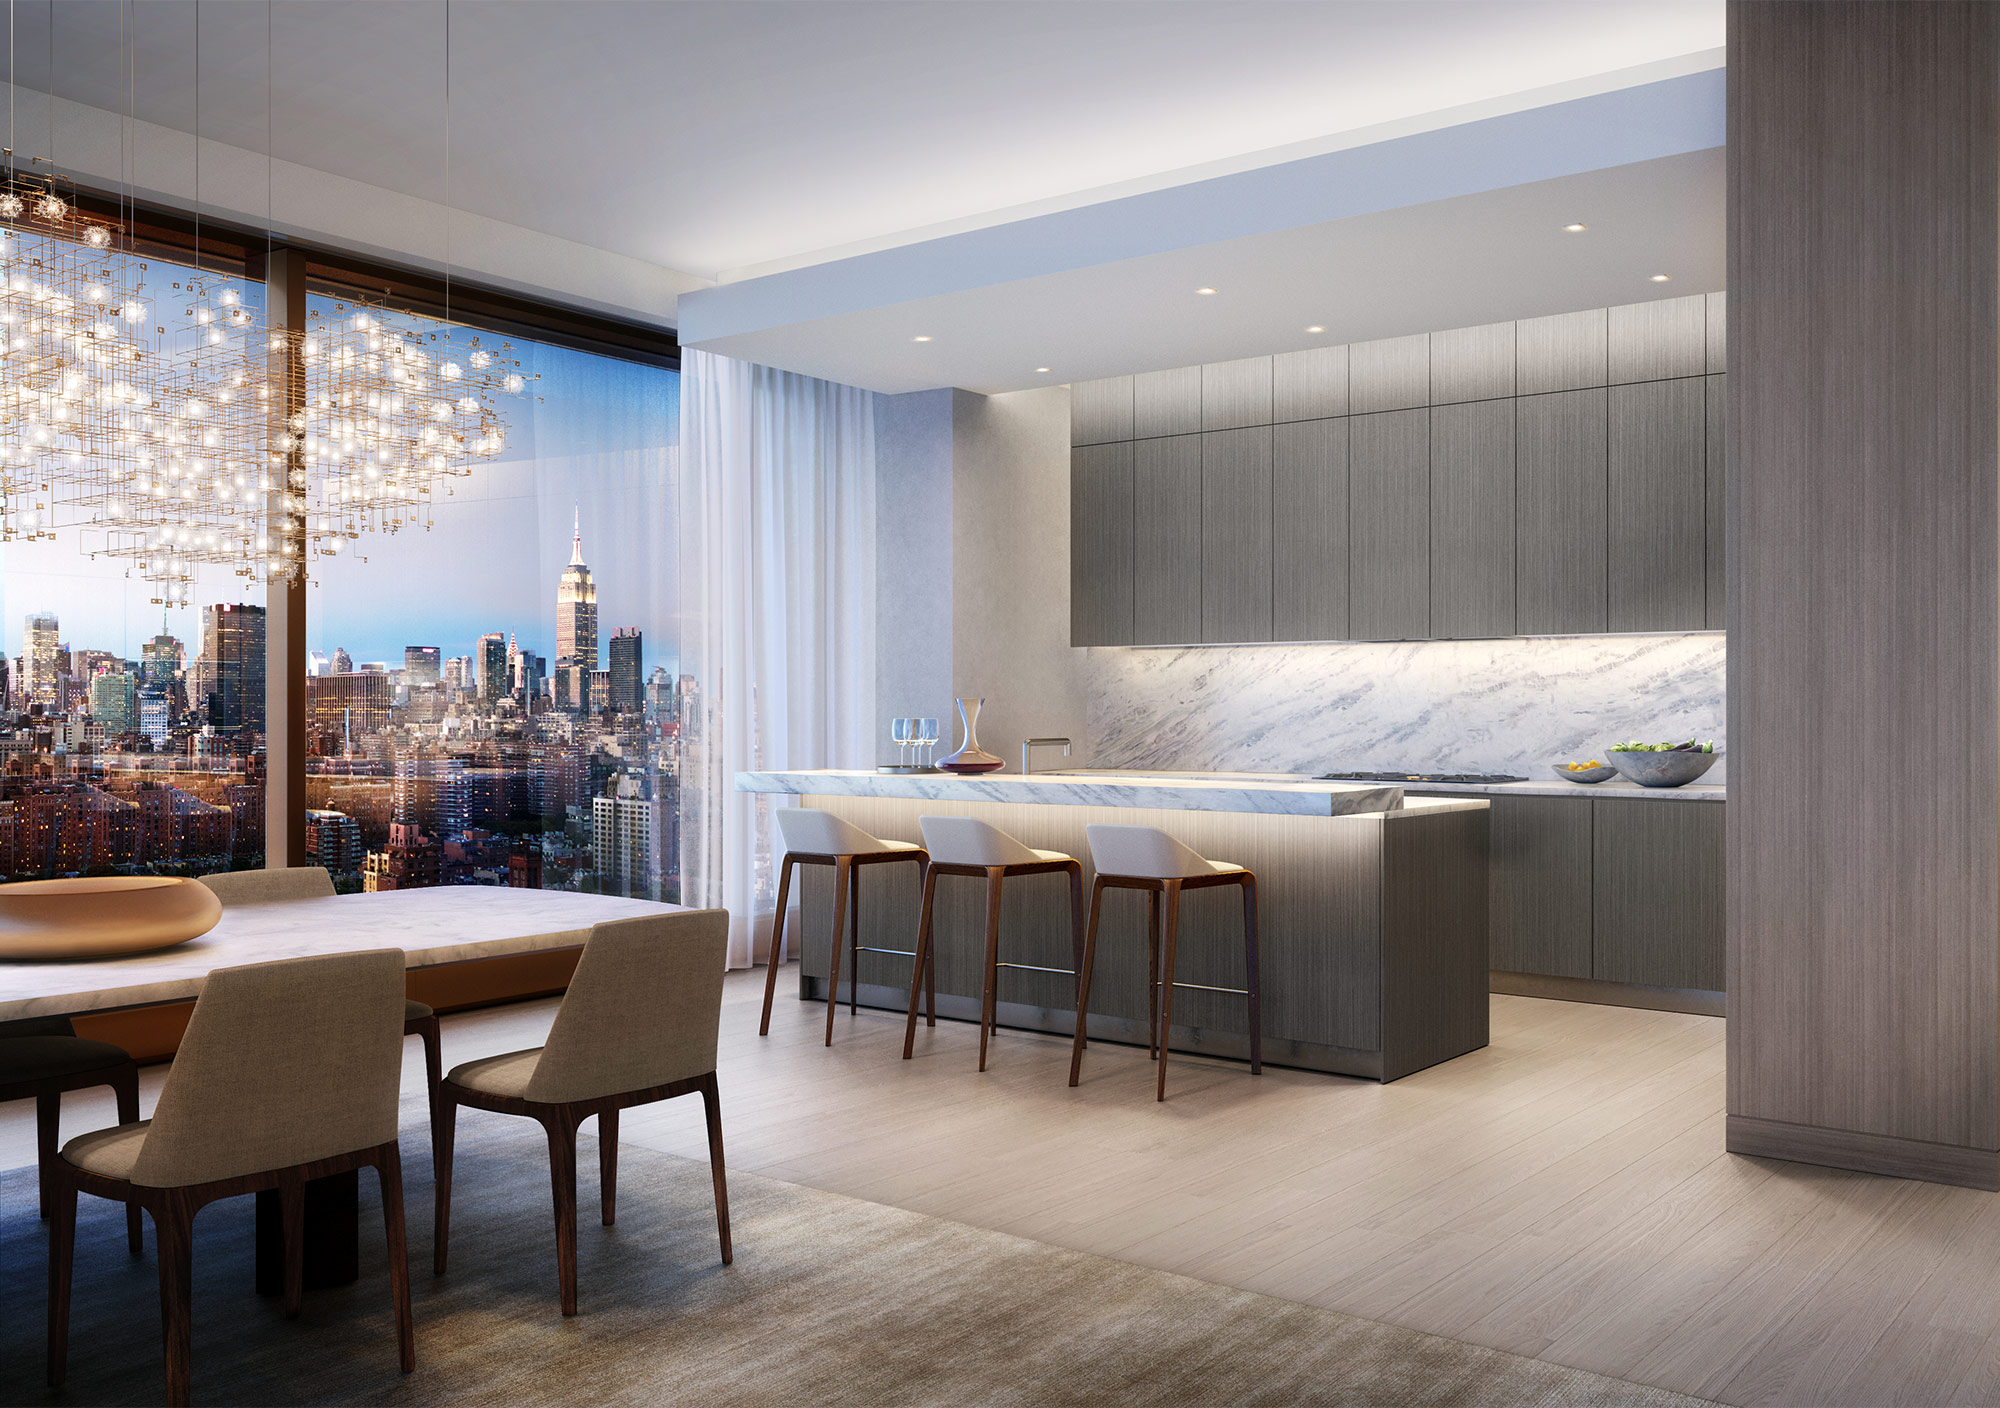 Luxurious kitchen and dining area overlooking the city skyline